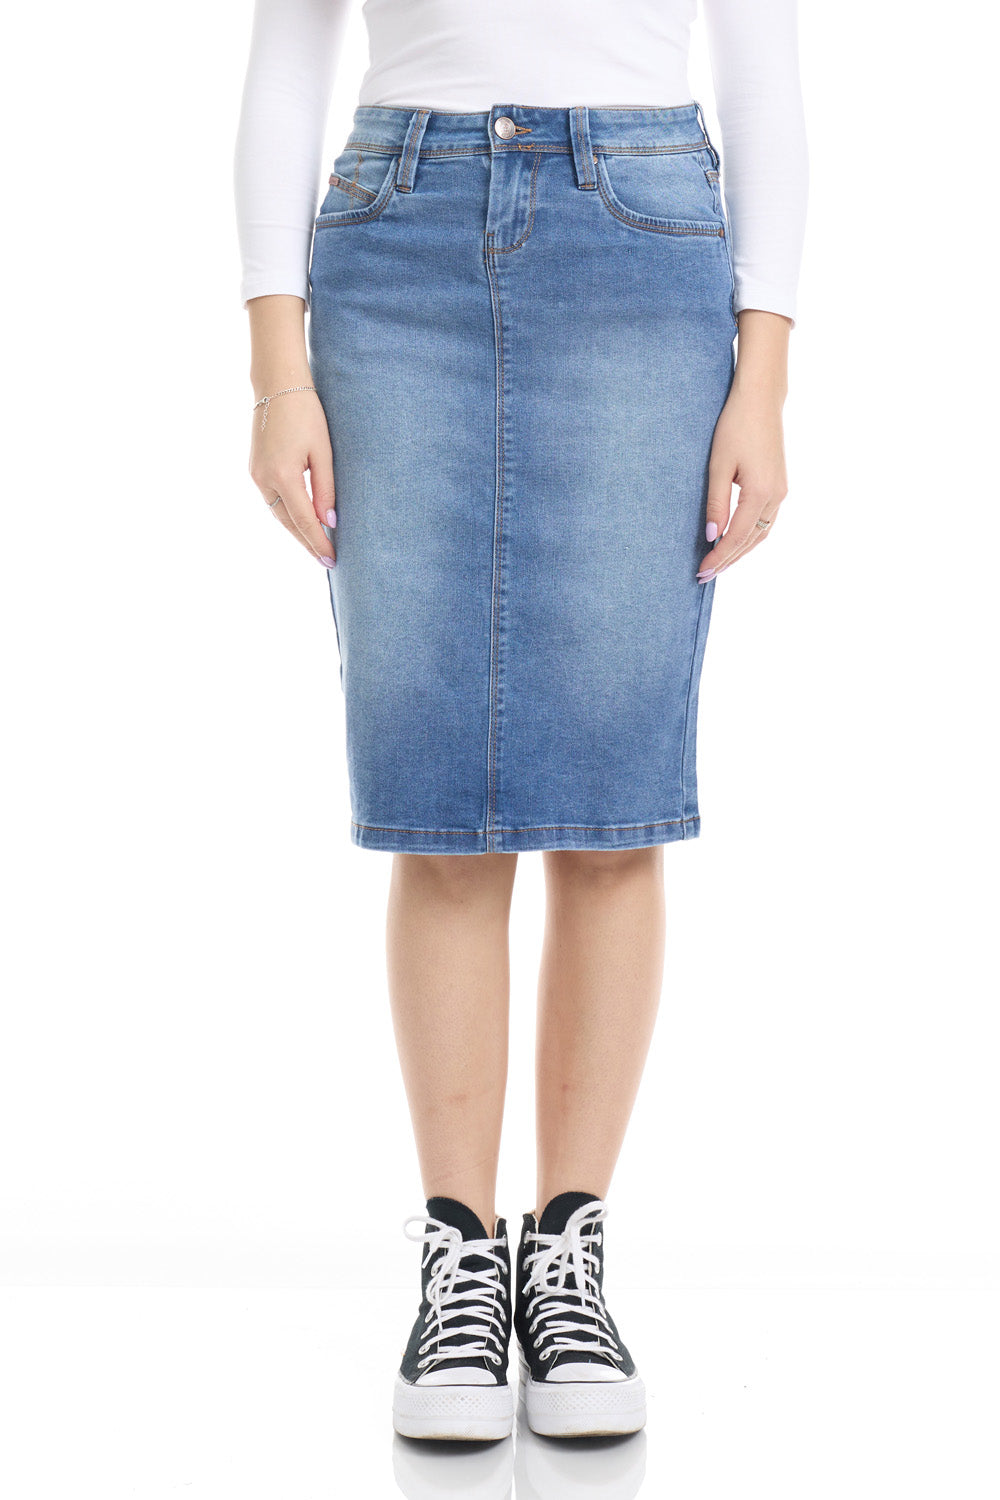 tsnius blue jean pencil skirt with button and zipper closure